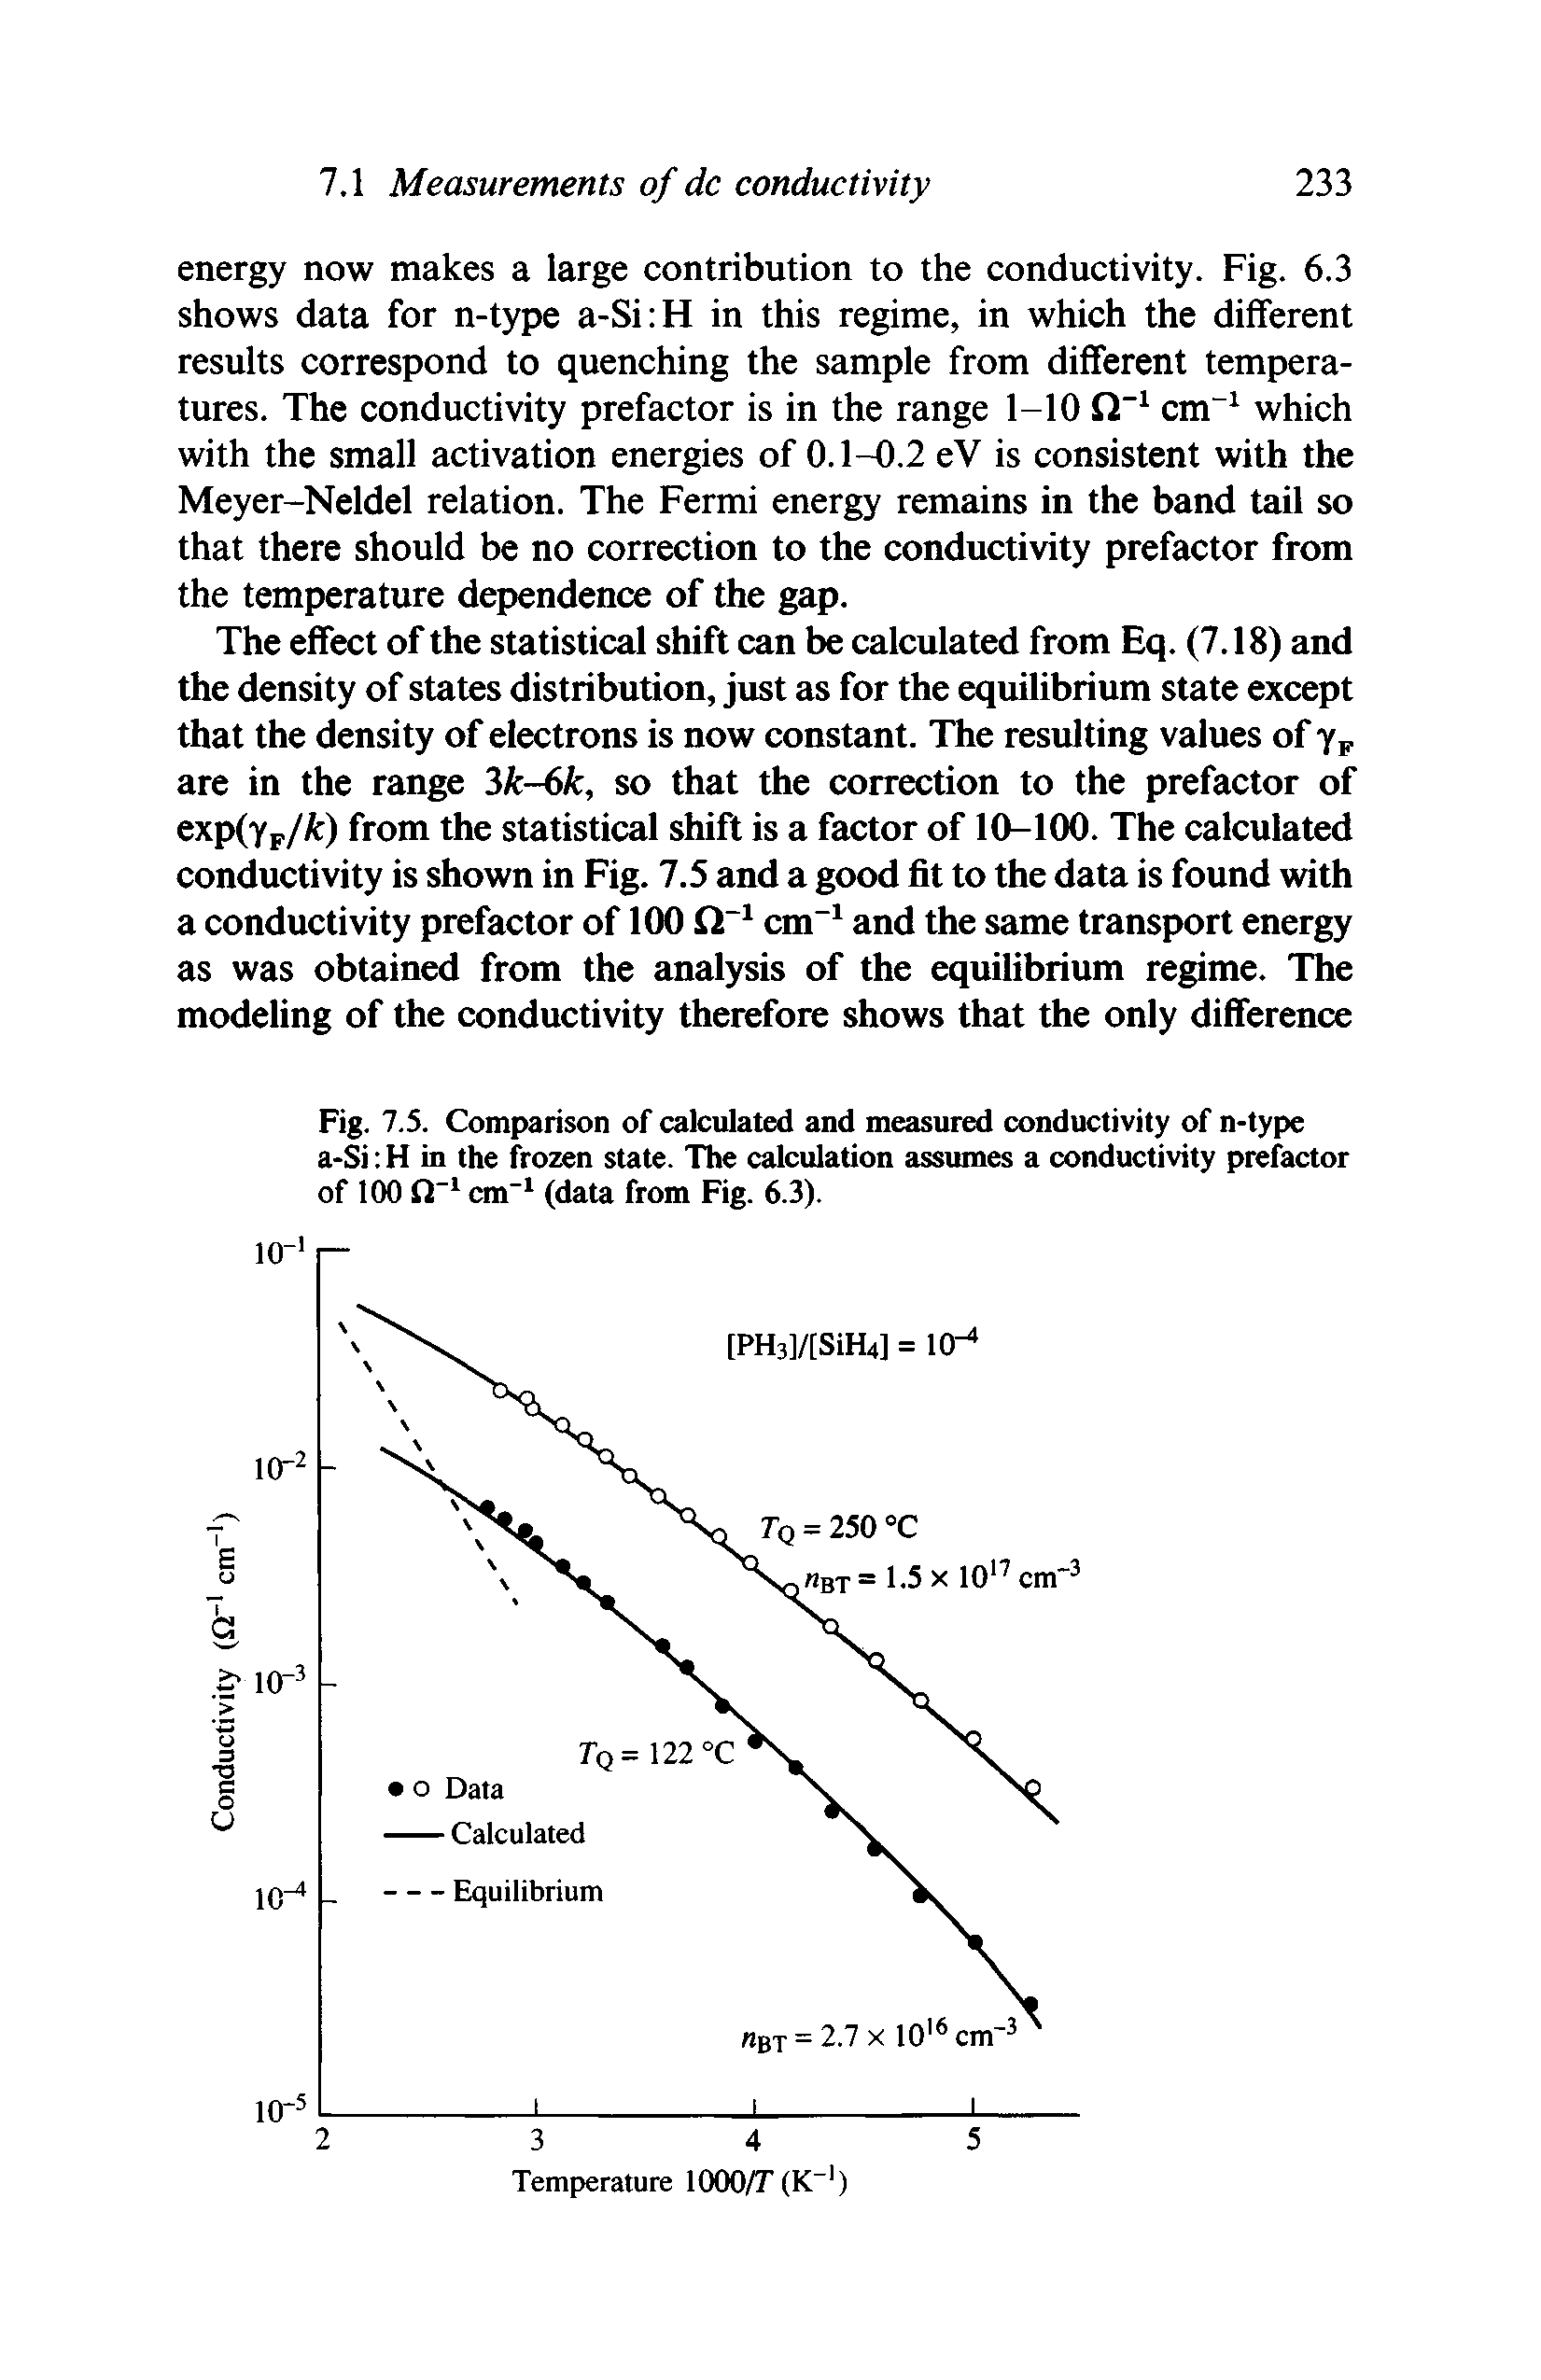 Fig. 7.5. Comparison of calculated and measured conductivity of n-type a-Si H in the frozen state. The calculation assumes a conductivity prefactor of 100 cm" (data from Fig. 6.3).